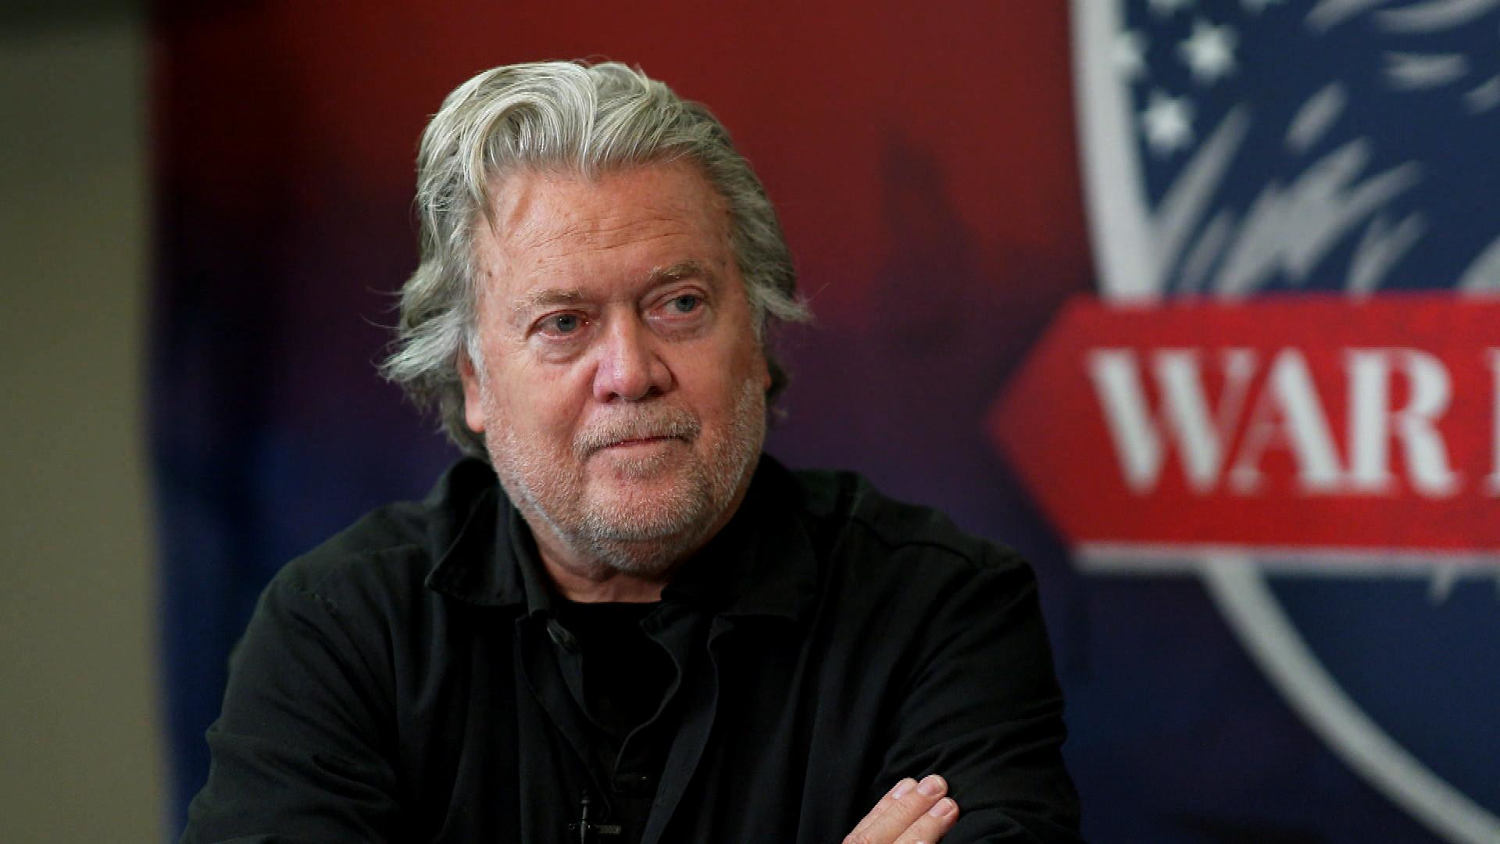 Steve Bannon says 'Donald Trump is a moderate in the MAGA movement': Full interview